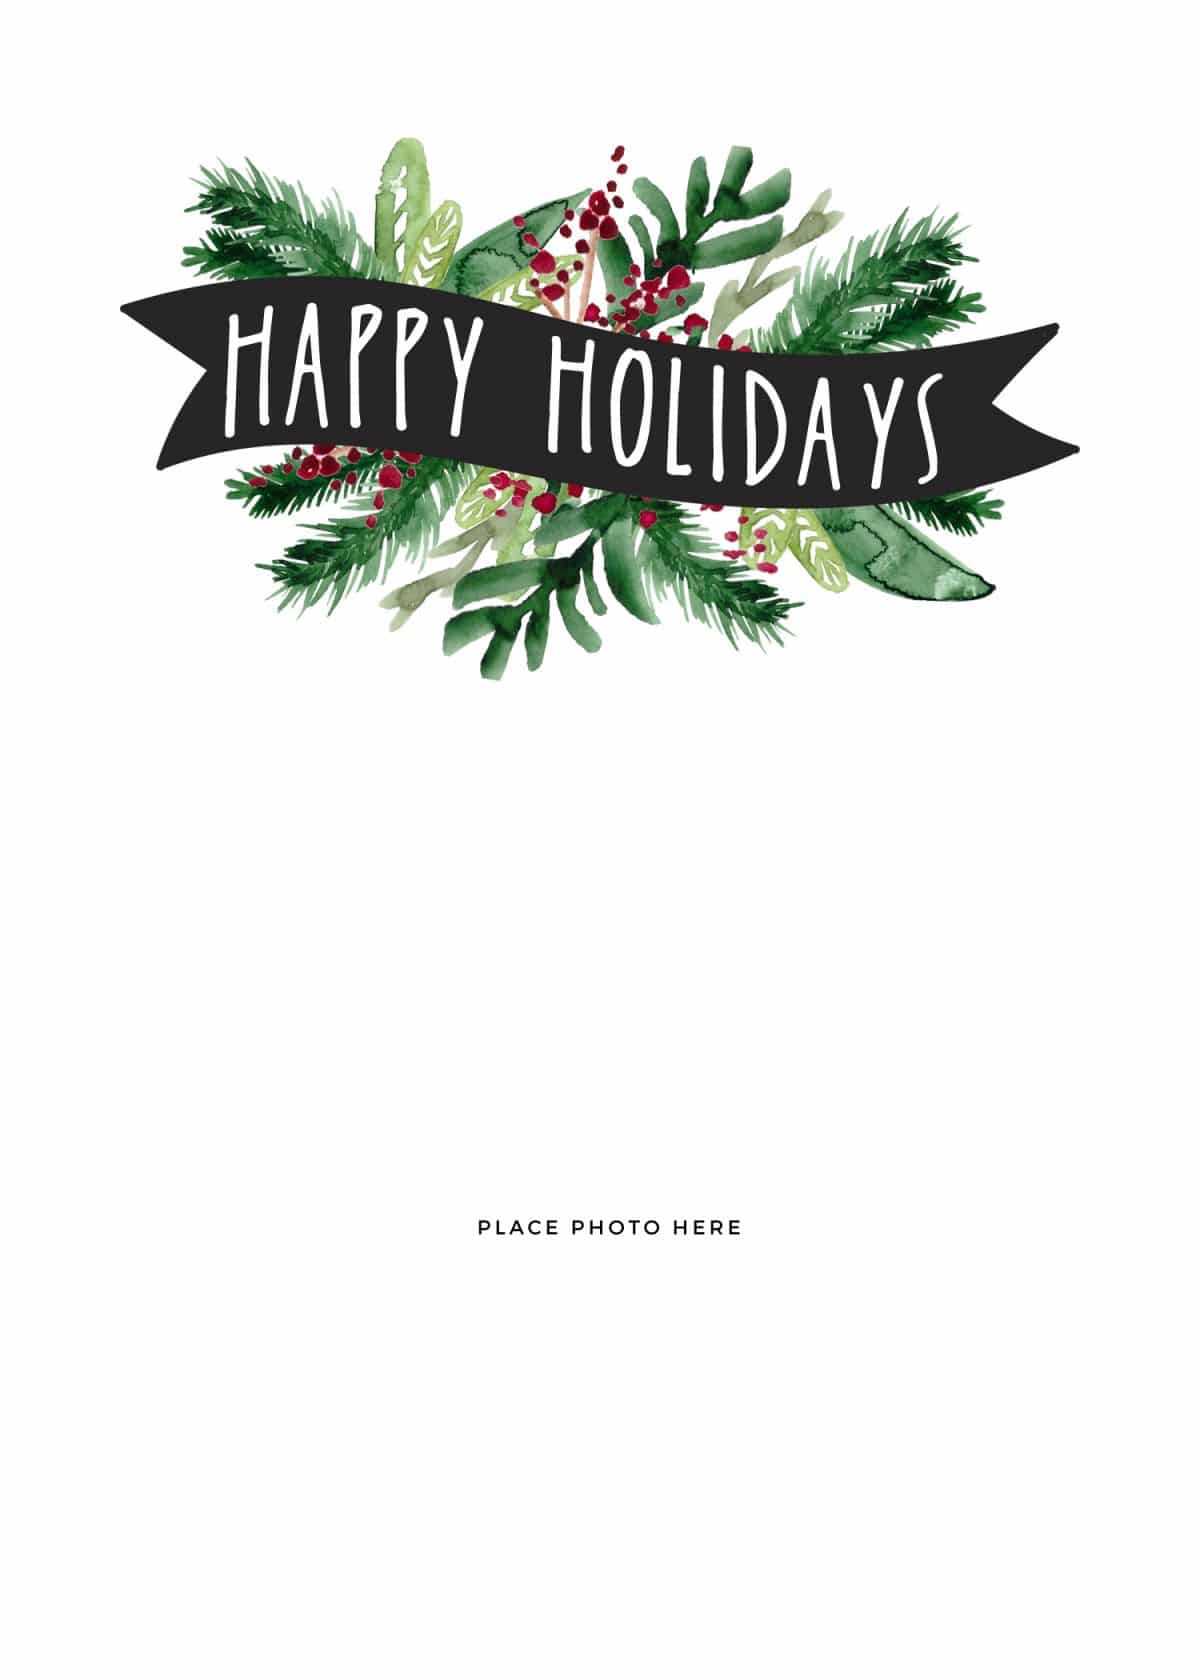 Make Your Own Photo Christmas Cards (For Free!) – Somewhat Pertaining To Christmas Photo Cards Templates Free Downloads